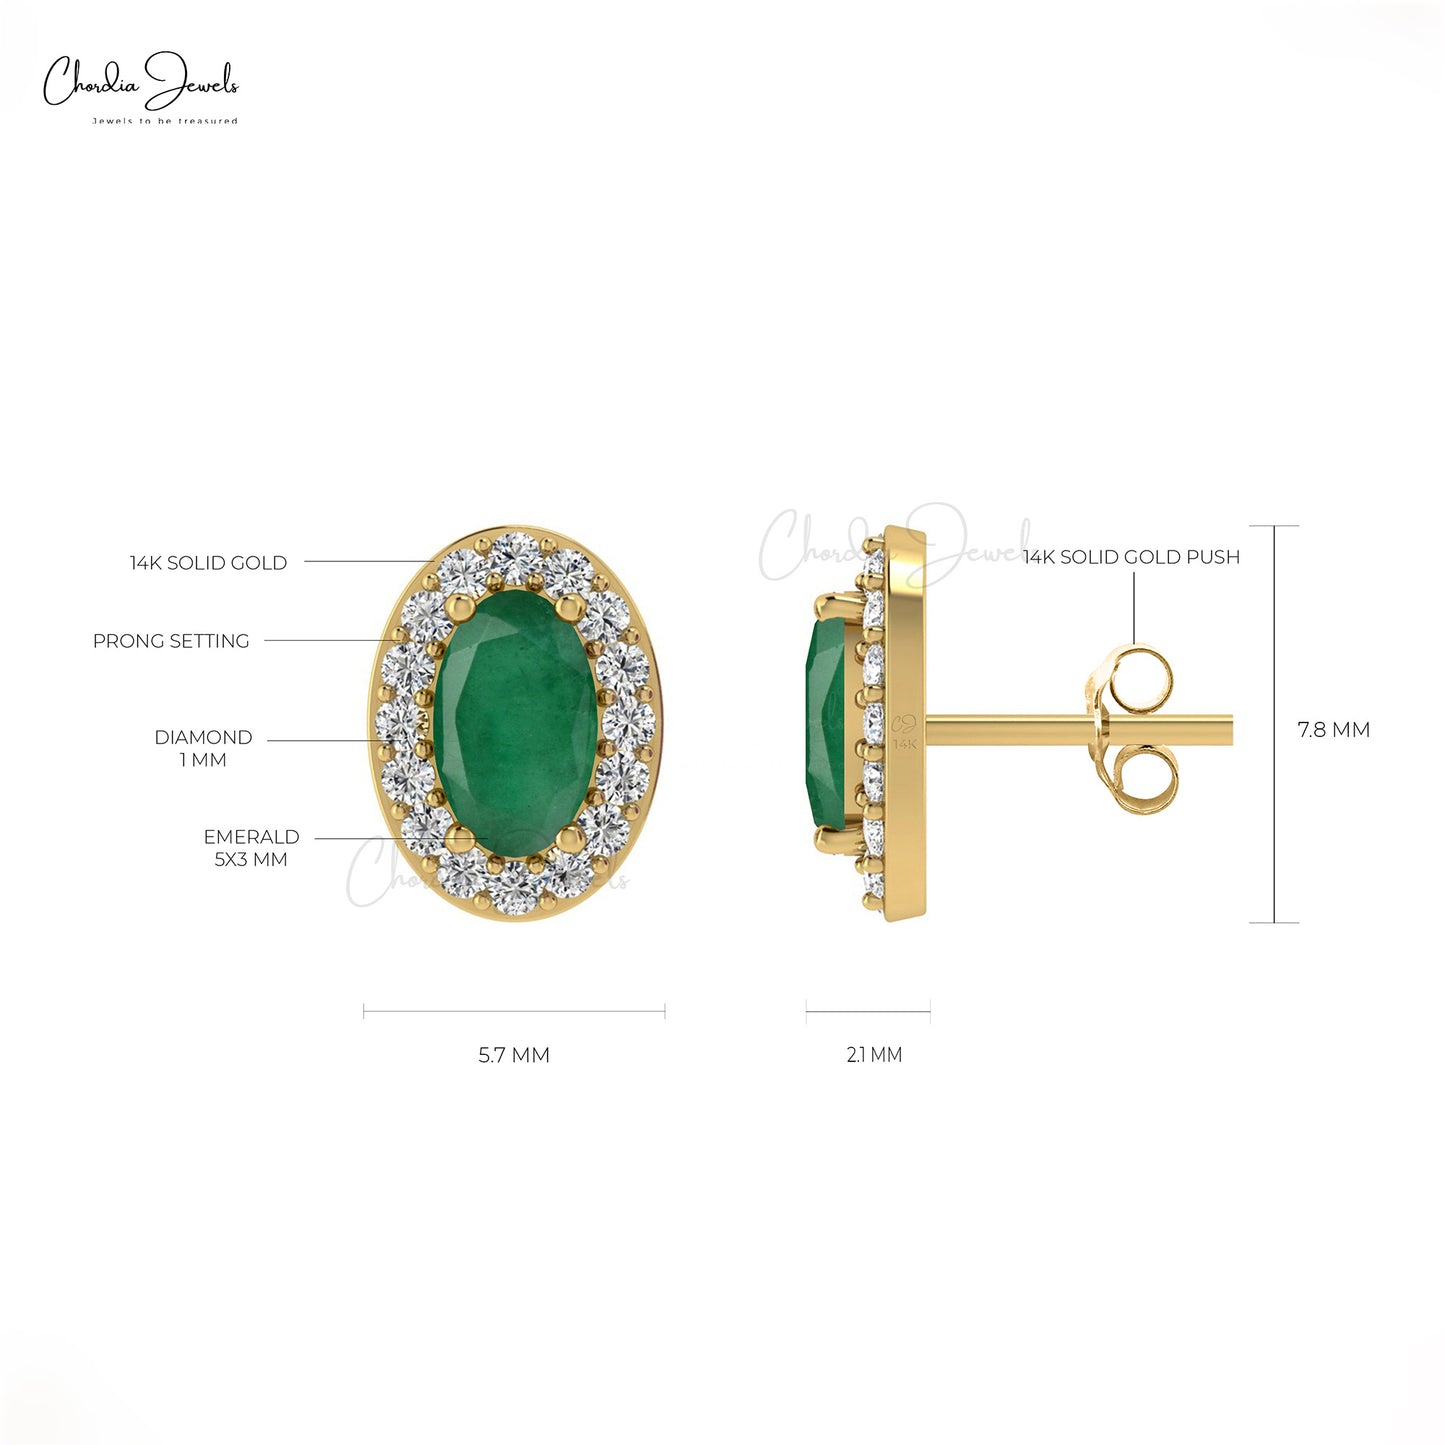 Celebrate your special moment with our oval emerald earrings.